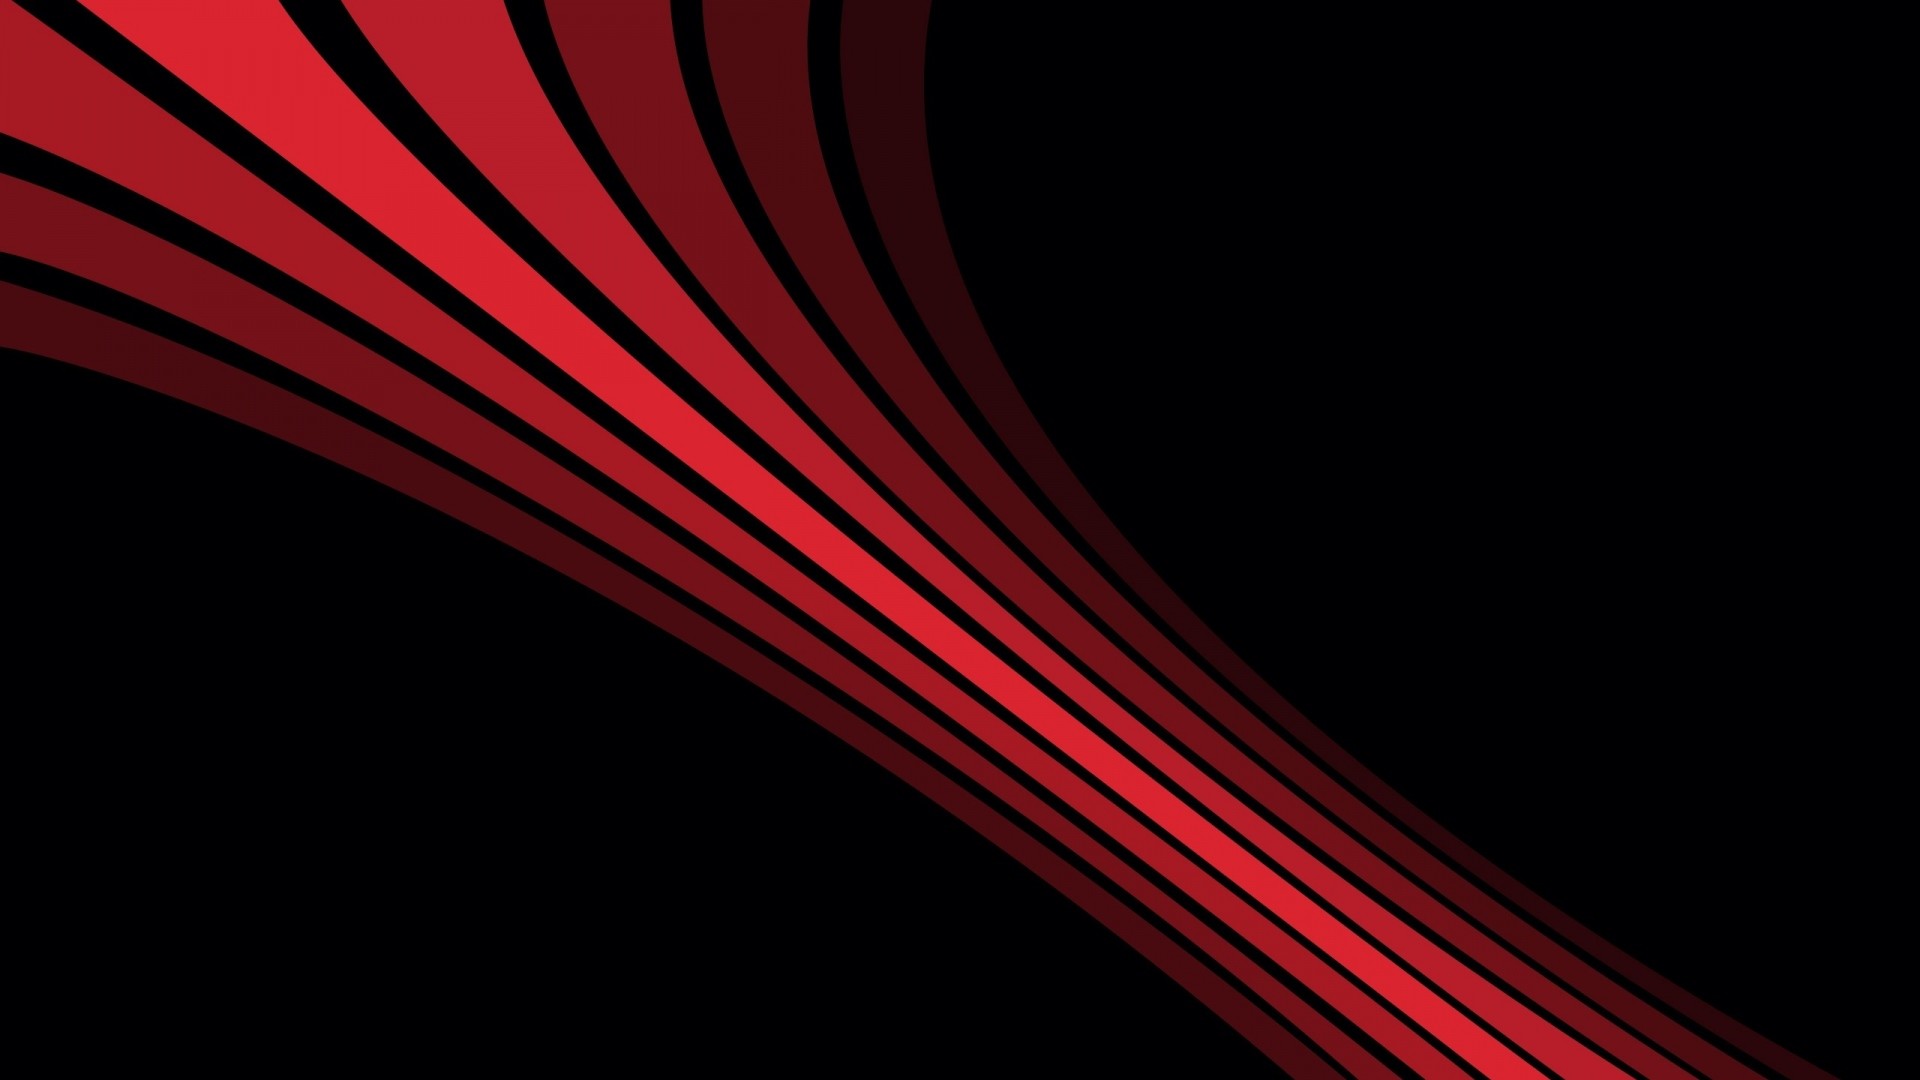 Black and Red 1080p Wallpaper (68+ images)